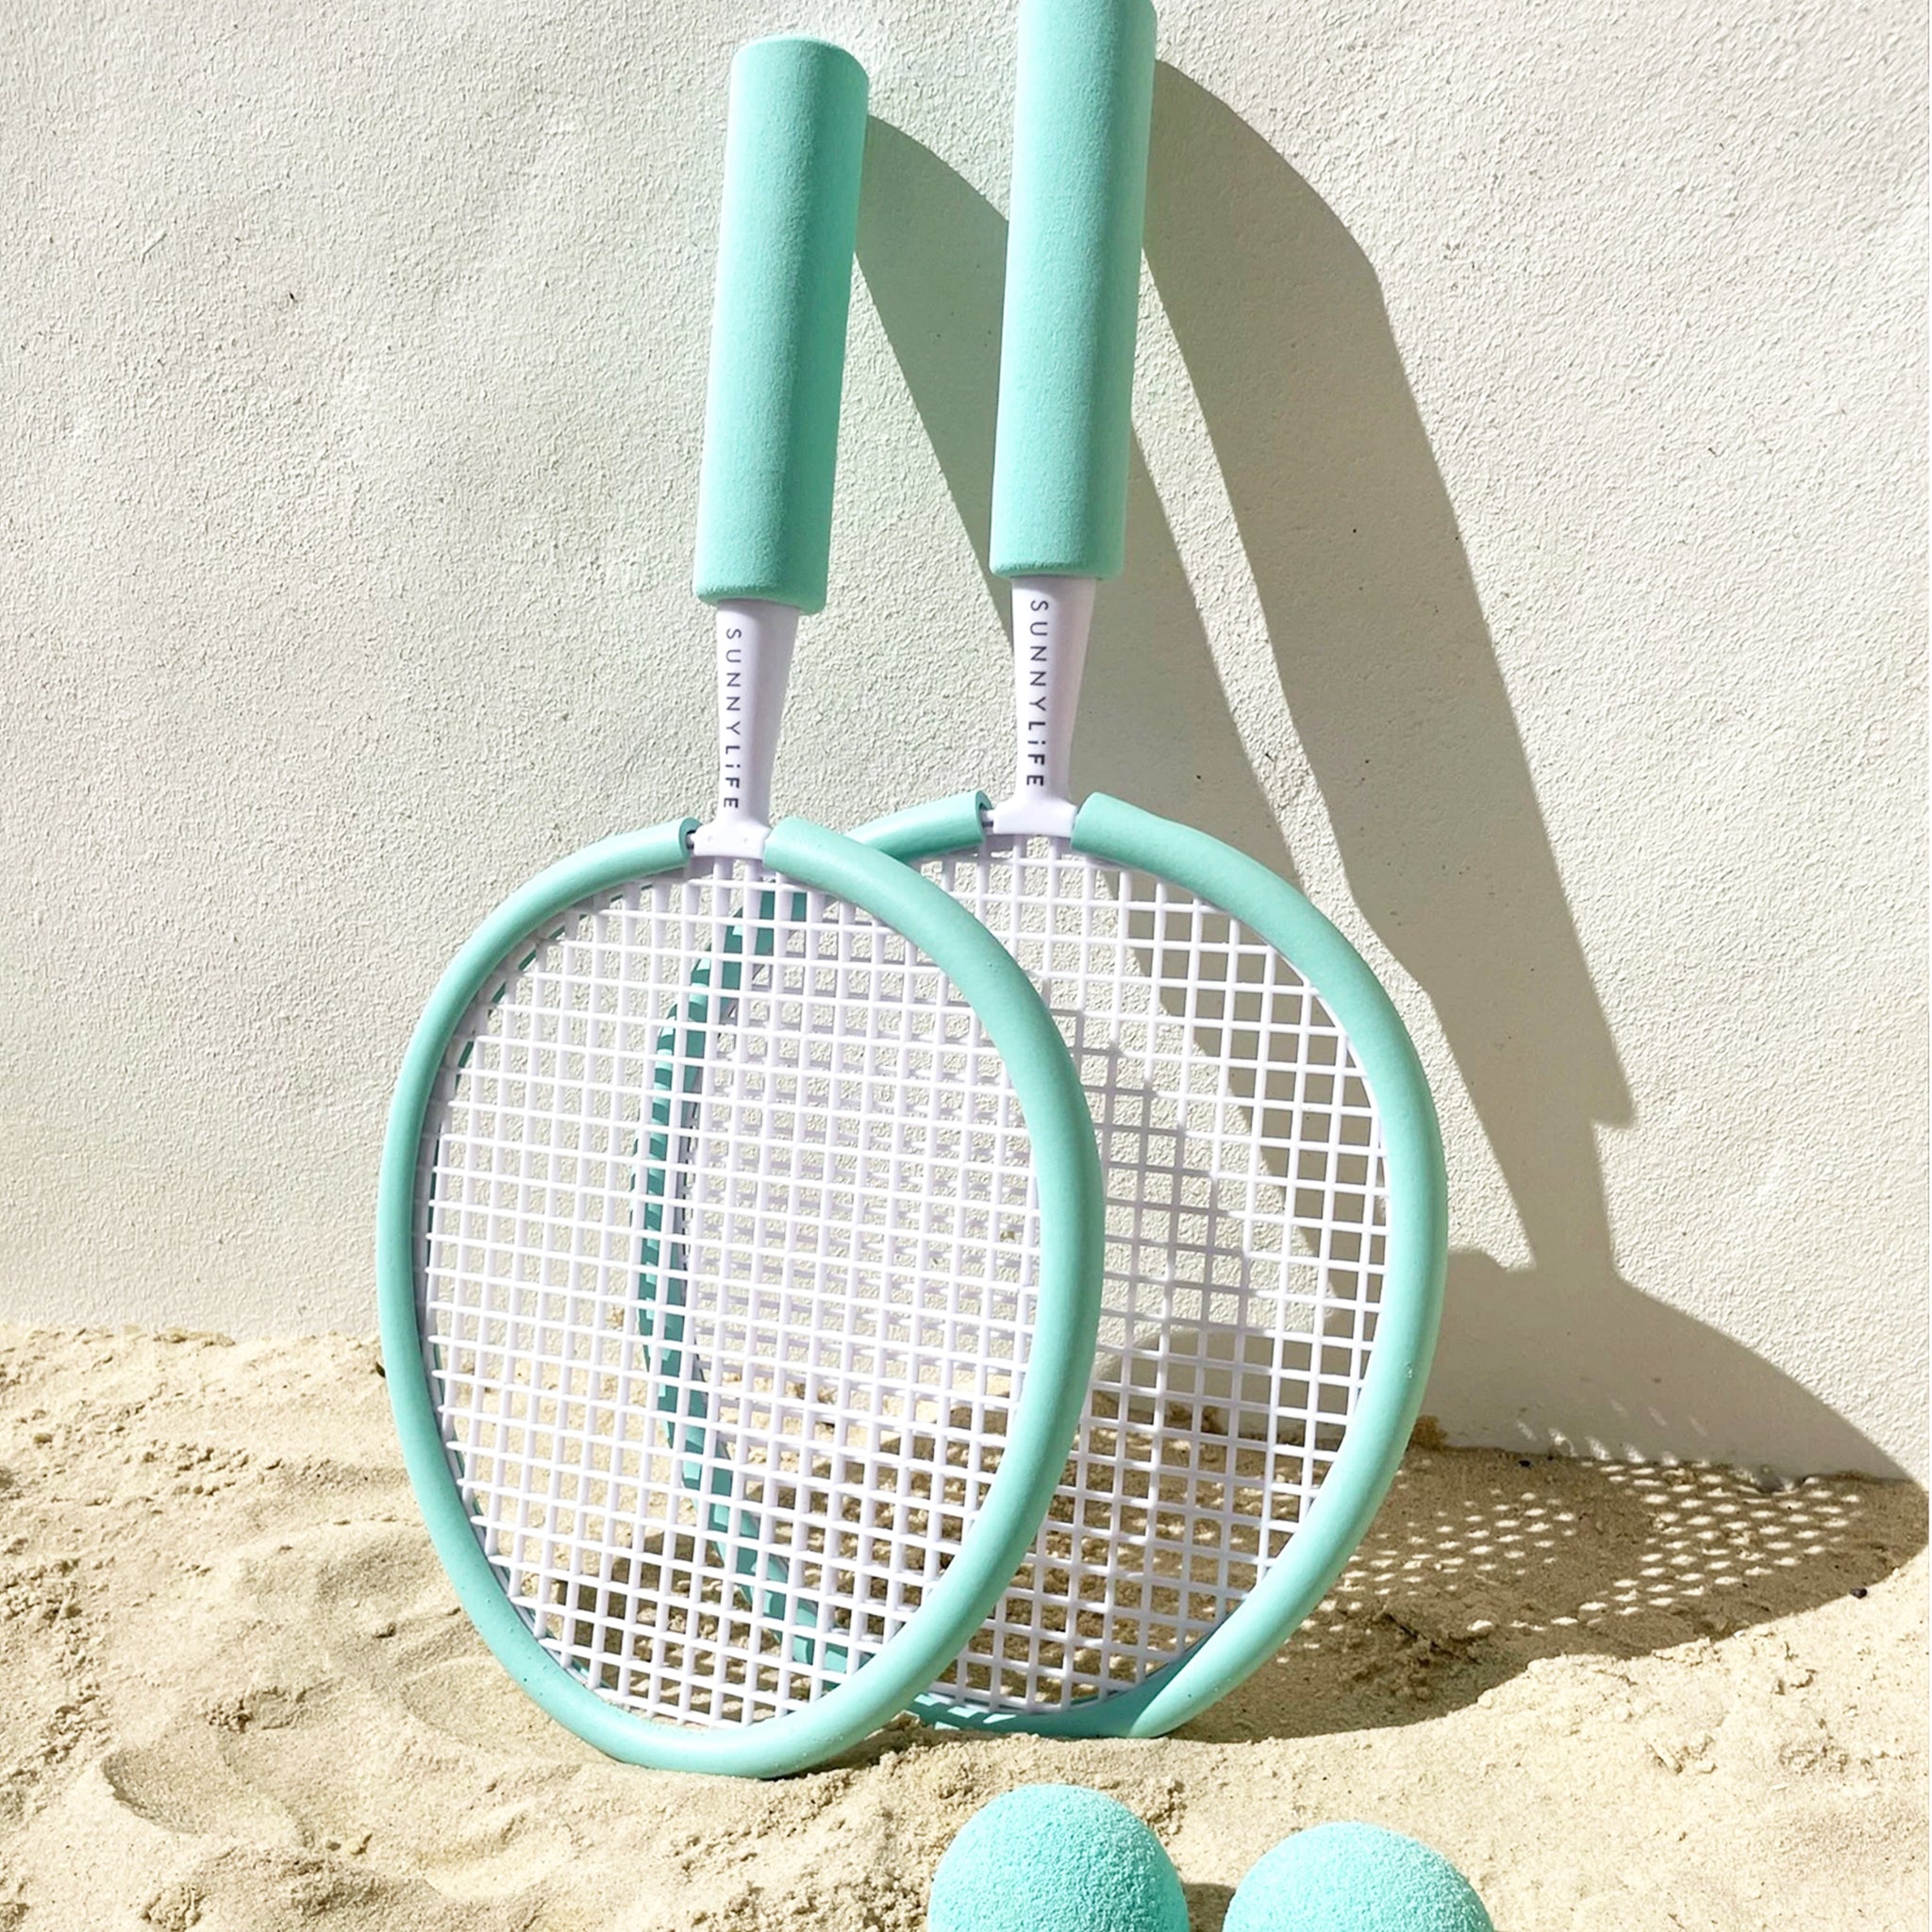 A pair of aqua rackets with two balls.